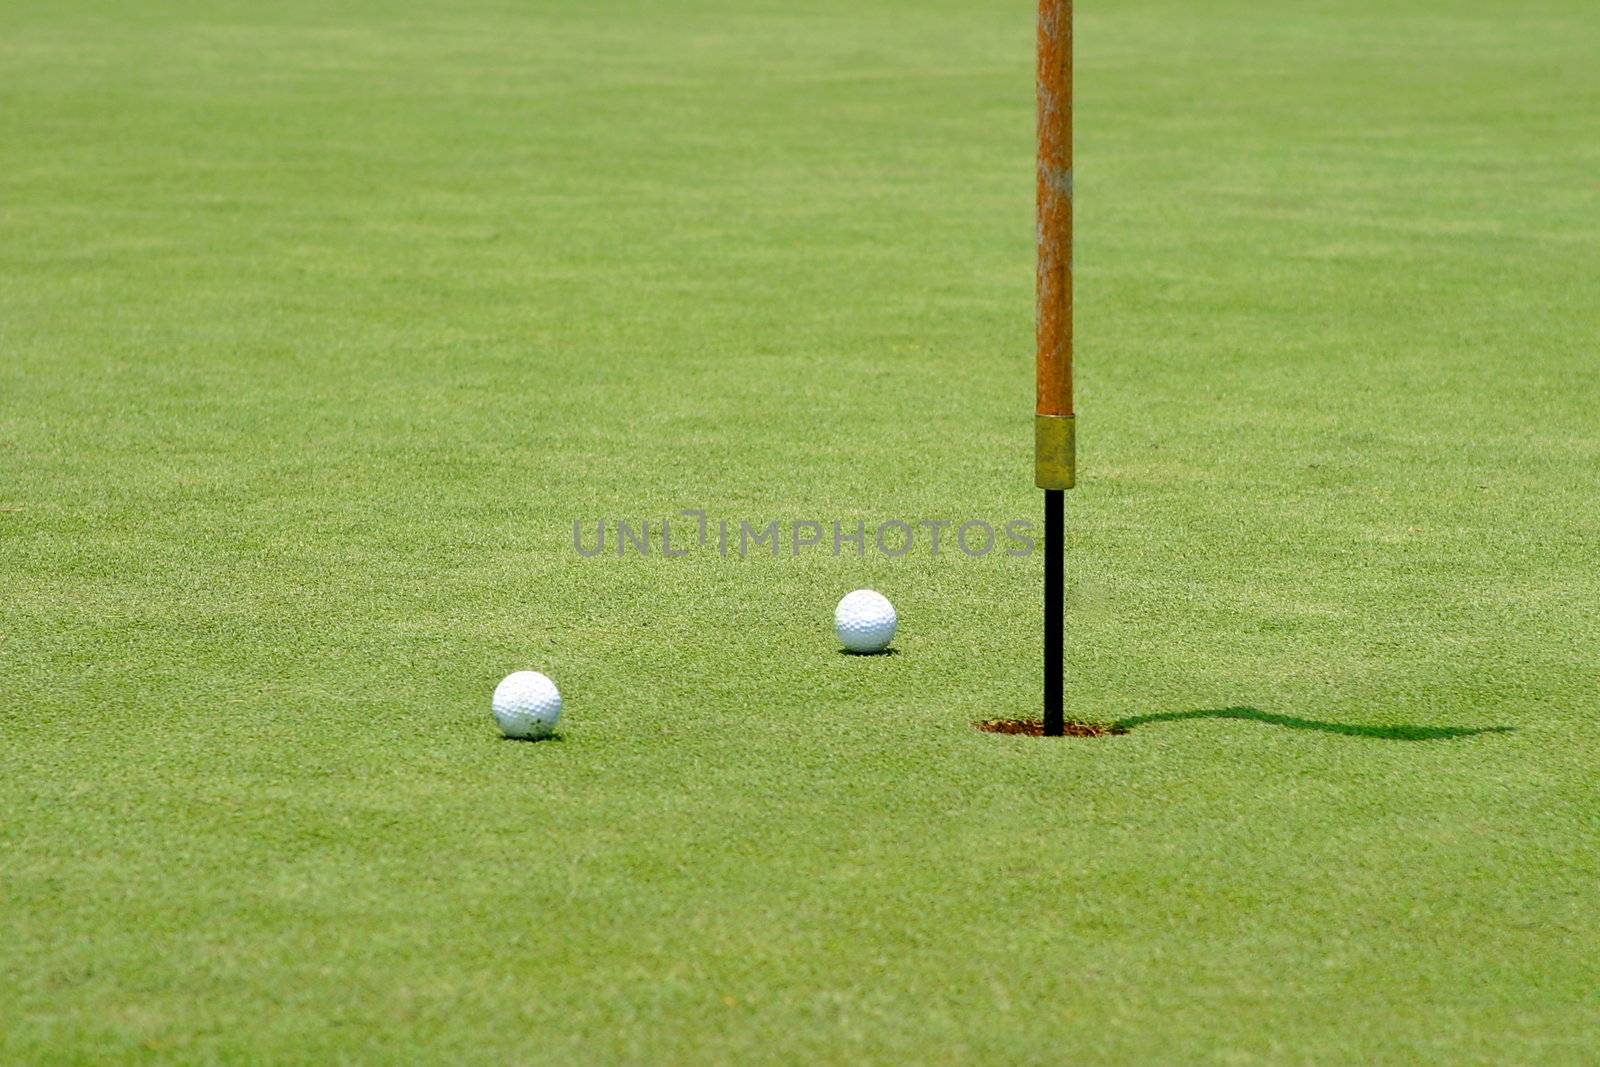 Two golf balls near the flagstick on the green.